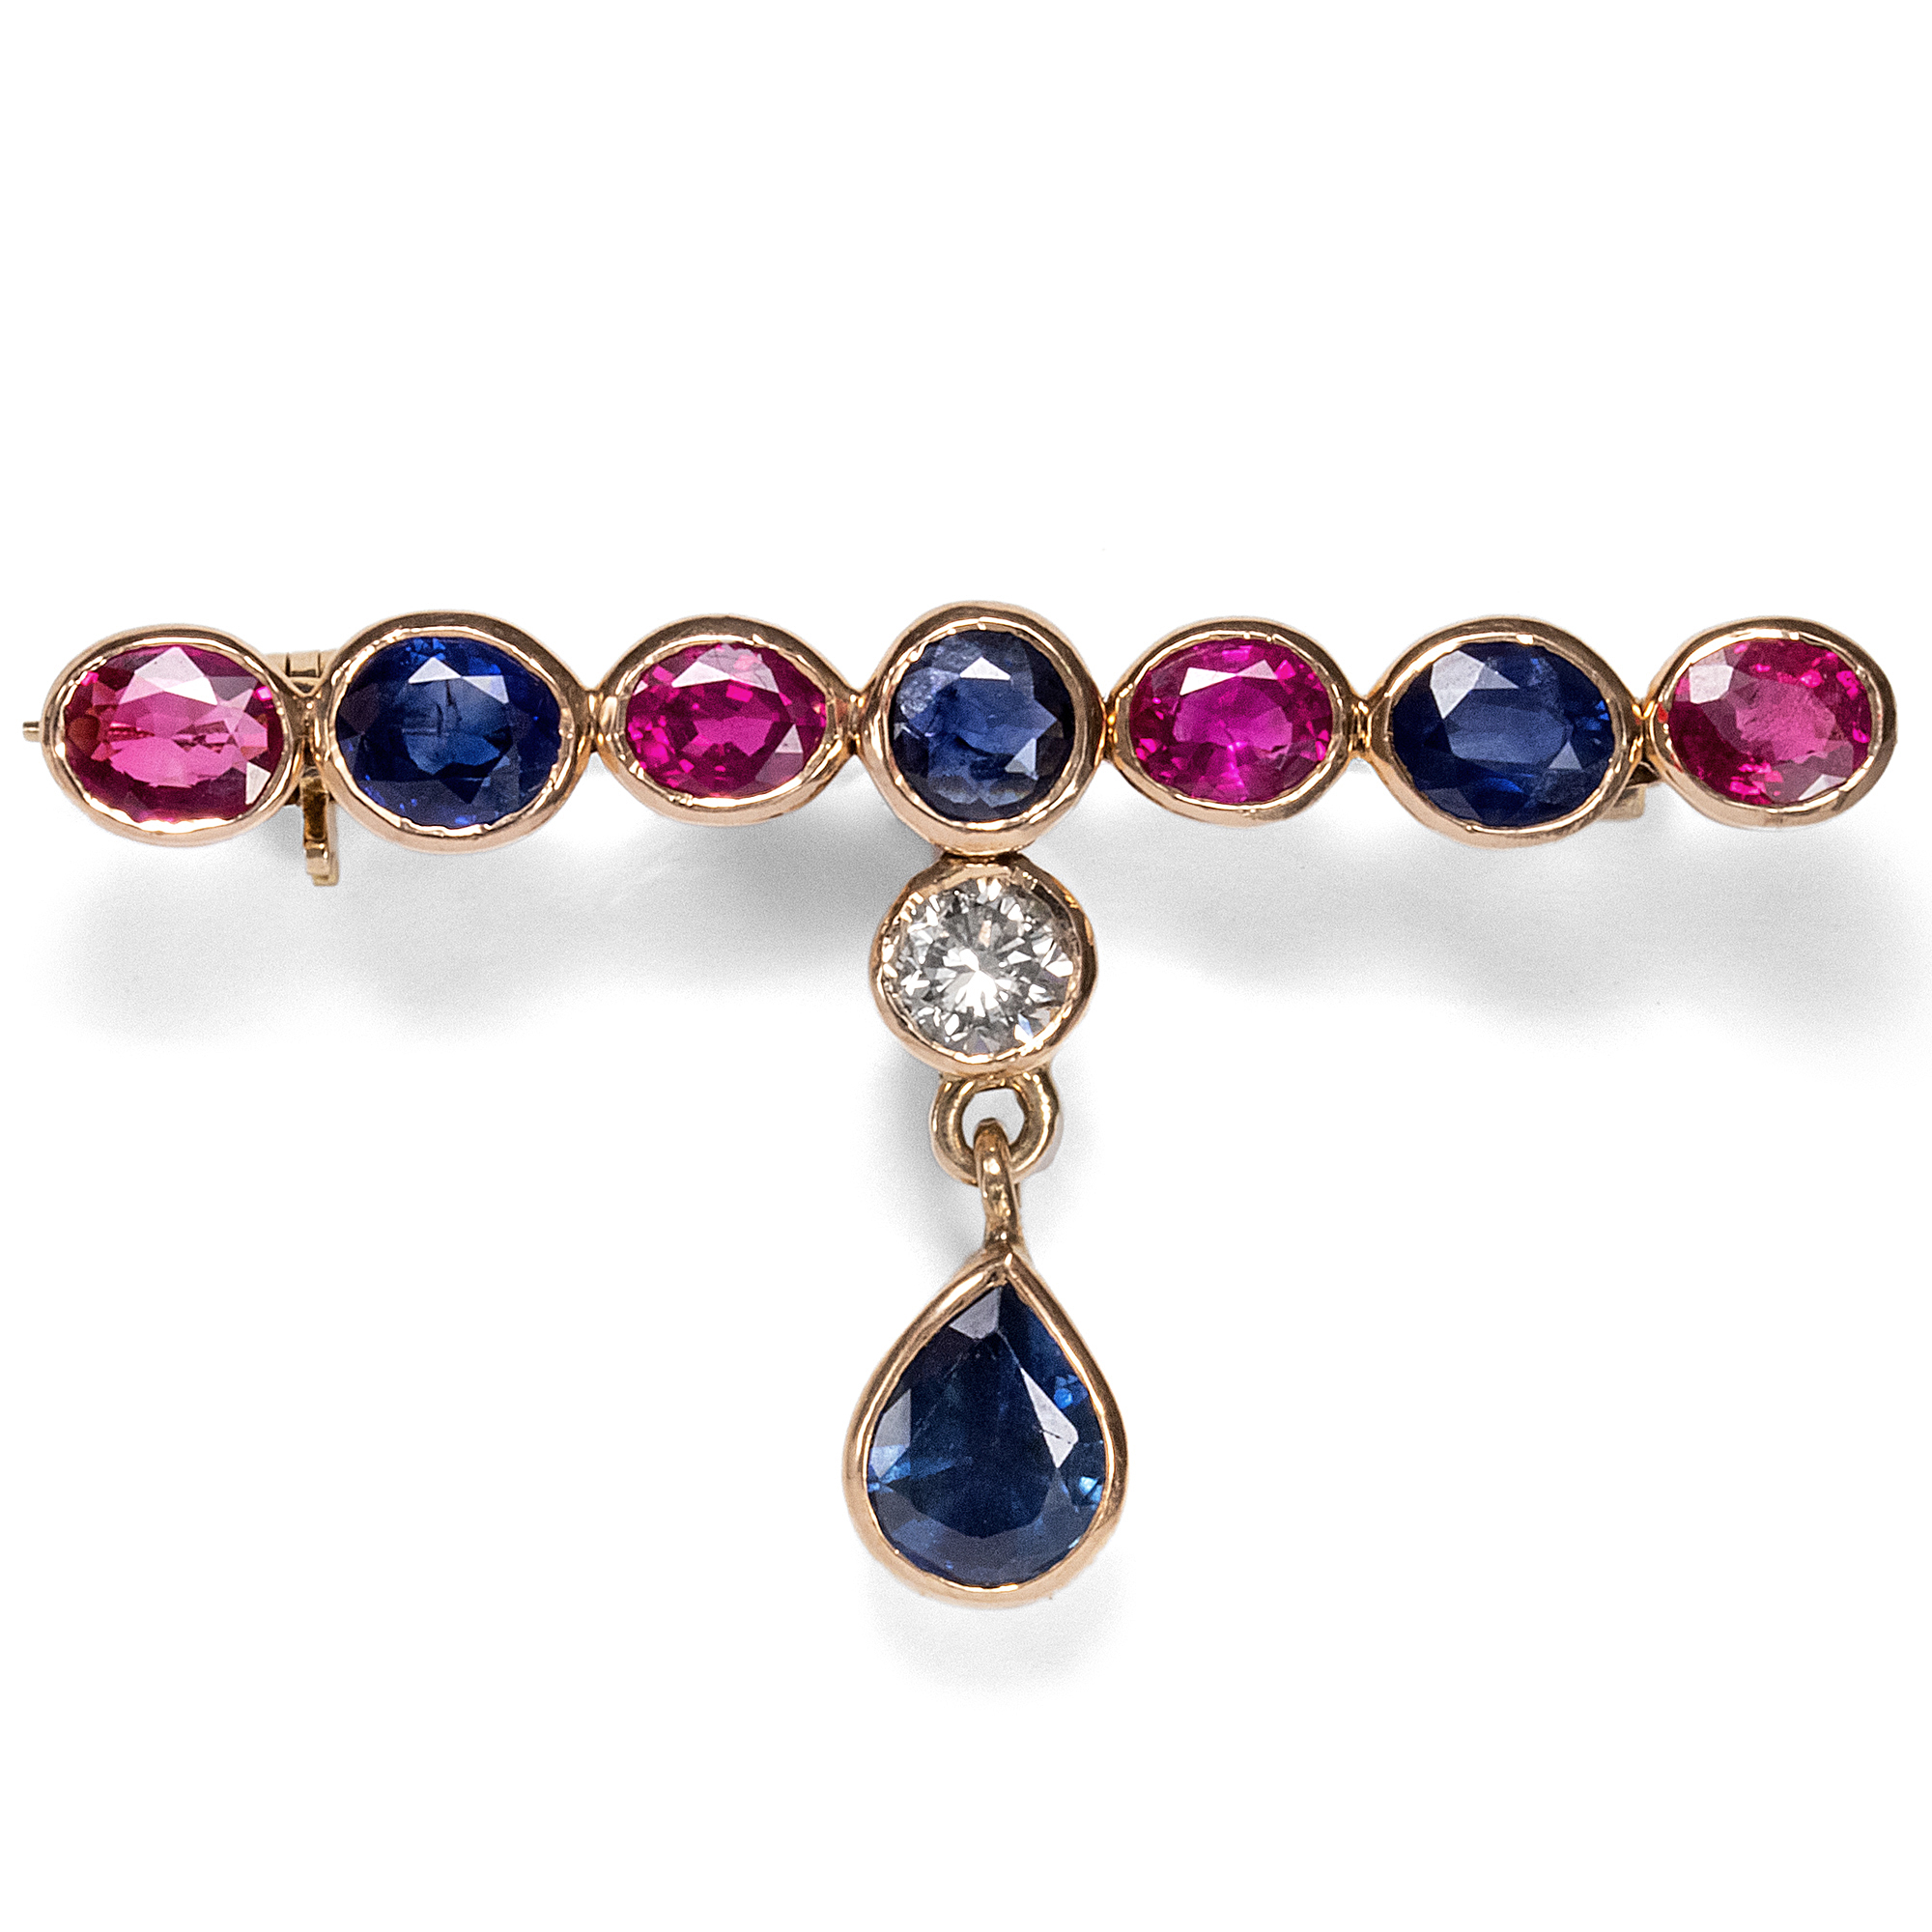 Colourful Vintage Ruby & Sapphire Gold Brooch, c. 1985